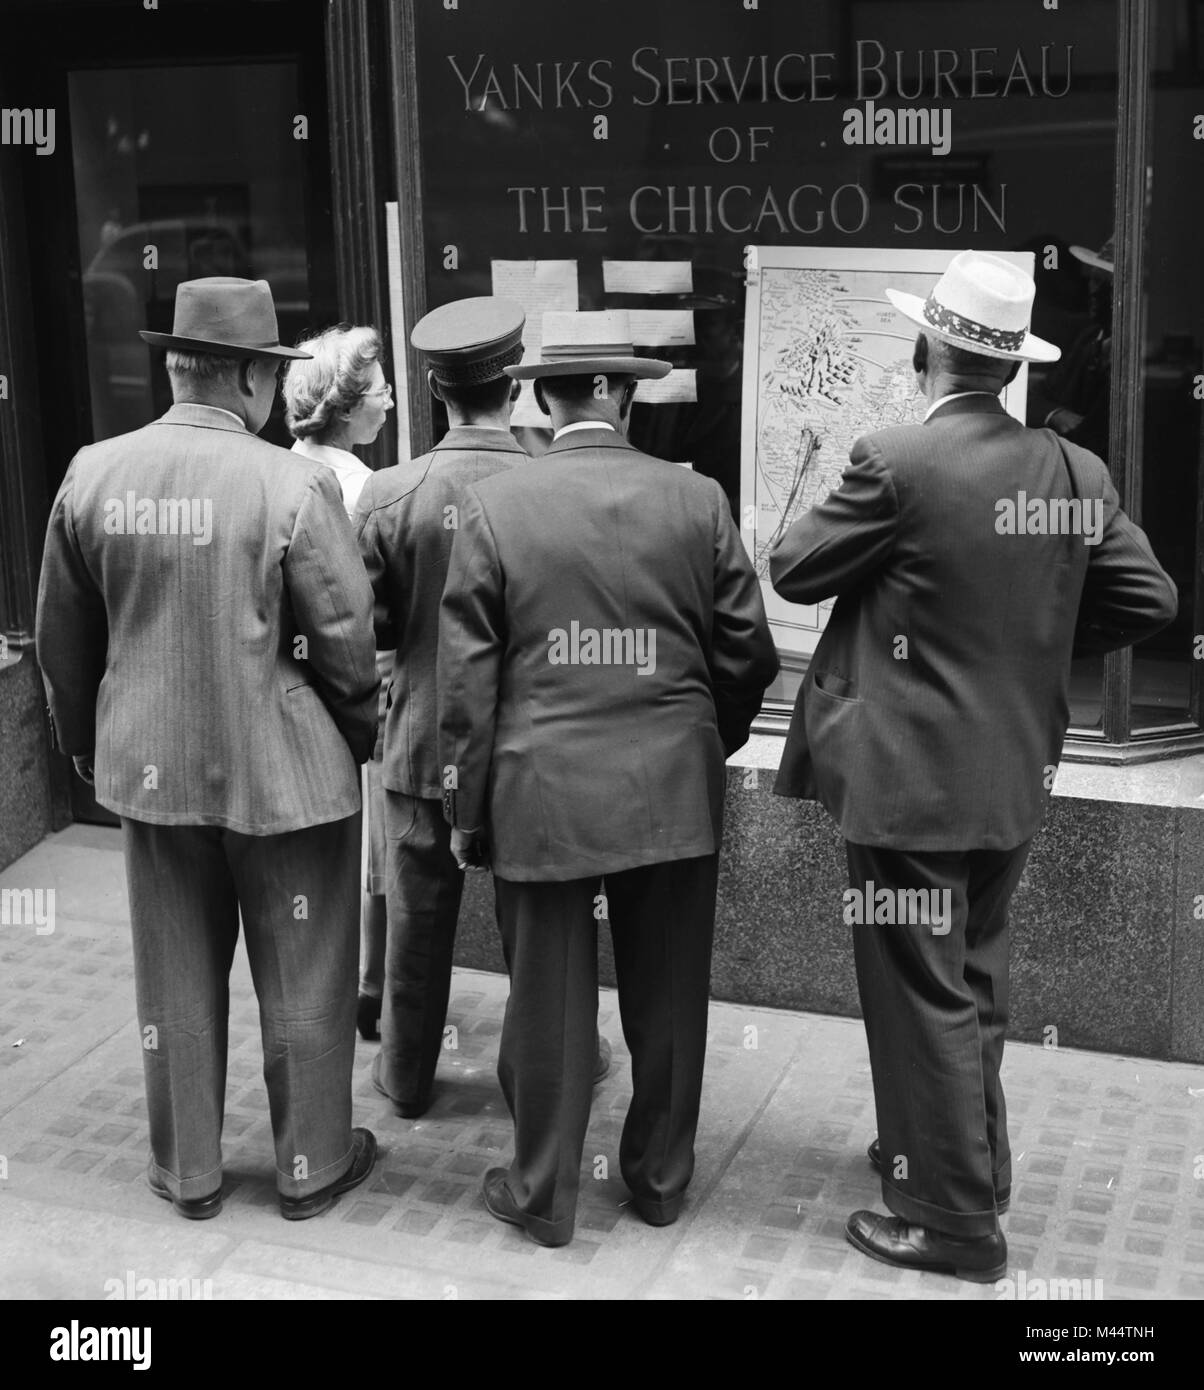 A crowd gathers in front of a World War II news update in the Yanks Service Bureau window of the Chicago Sun, ca. 1944. Stock Photo